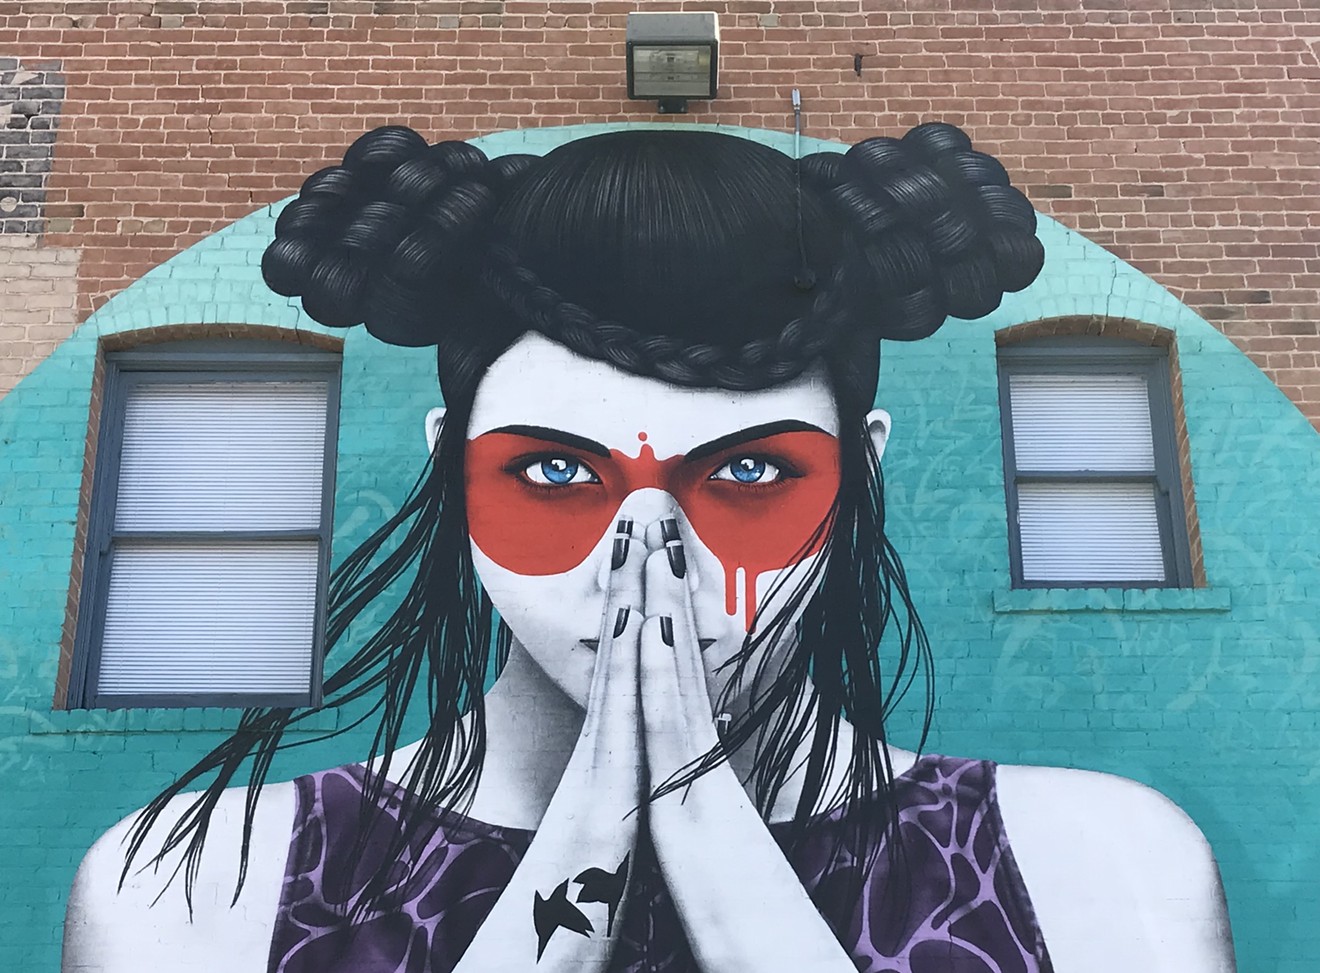 Check out this mural painted by Fin Dac near Etherton Gallery in Tucson.